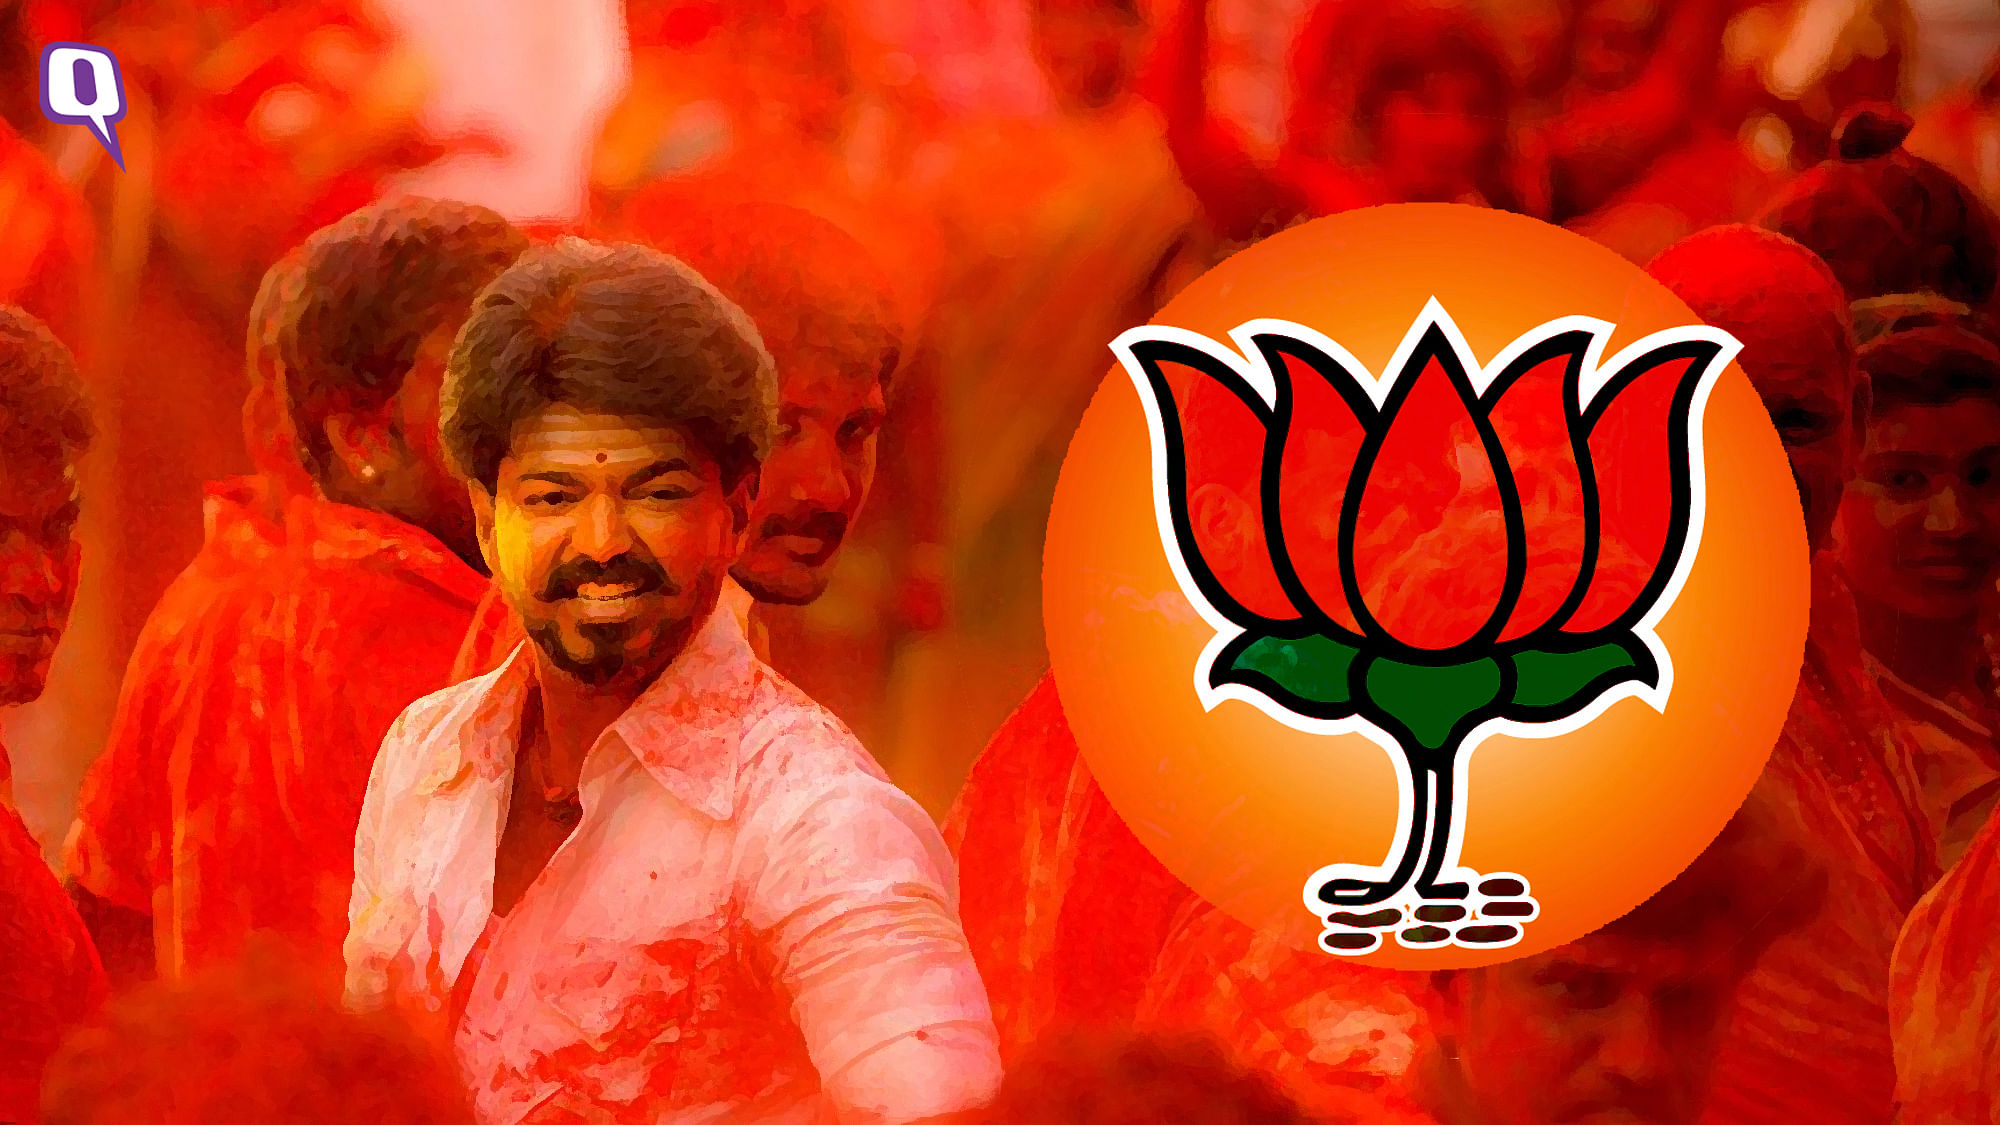 

Row over Mersal doesn’t bode well for BJP’s Tamil Nadu, where people are viewing it as diktat by a Hindi party.